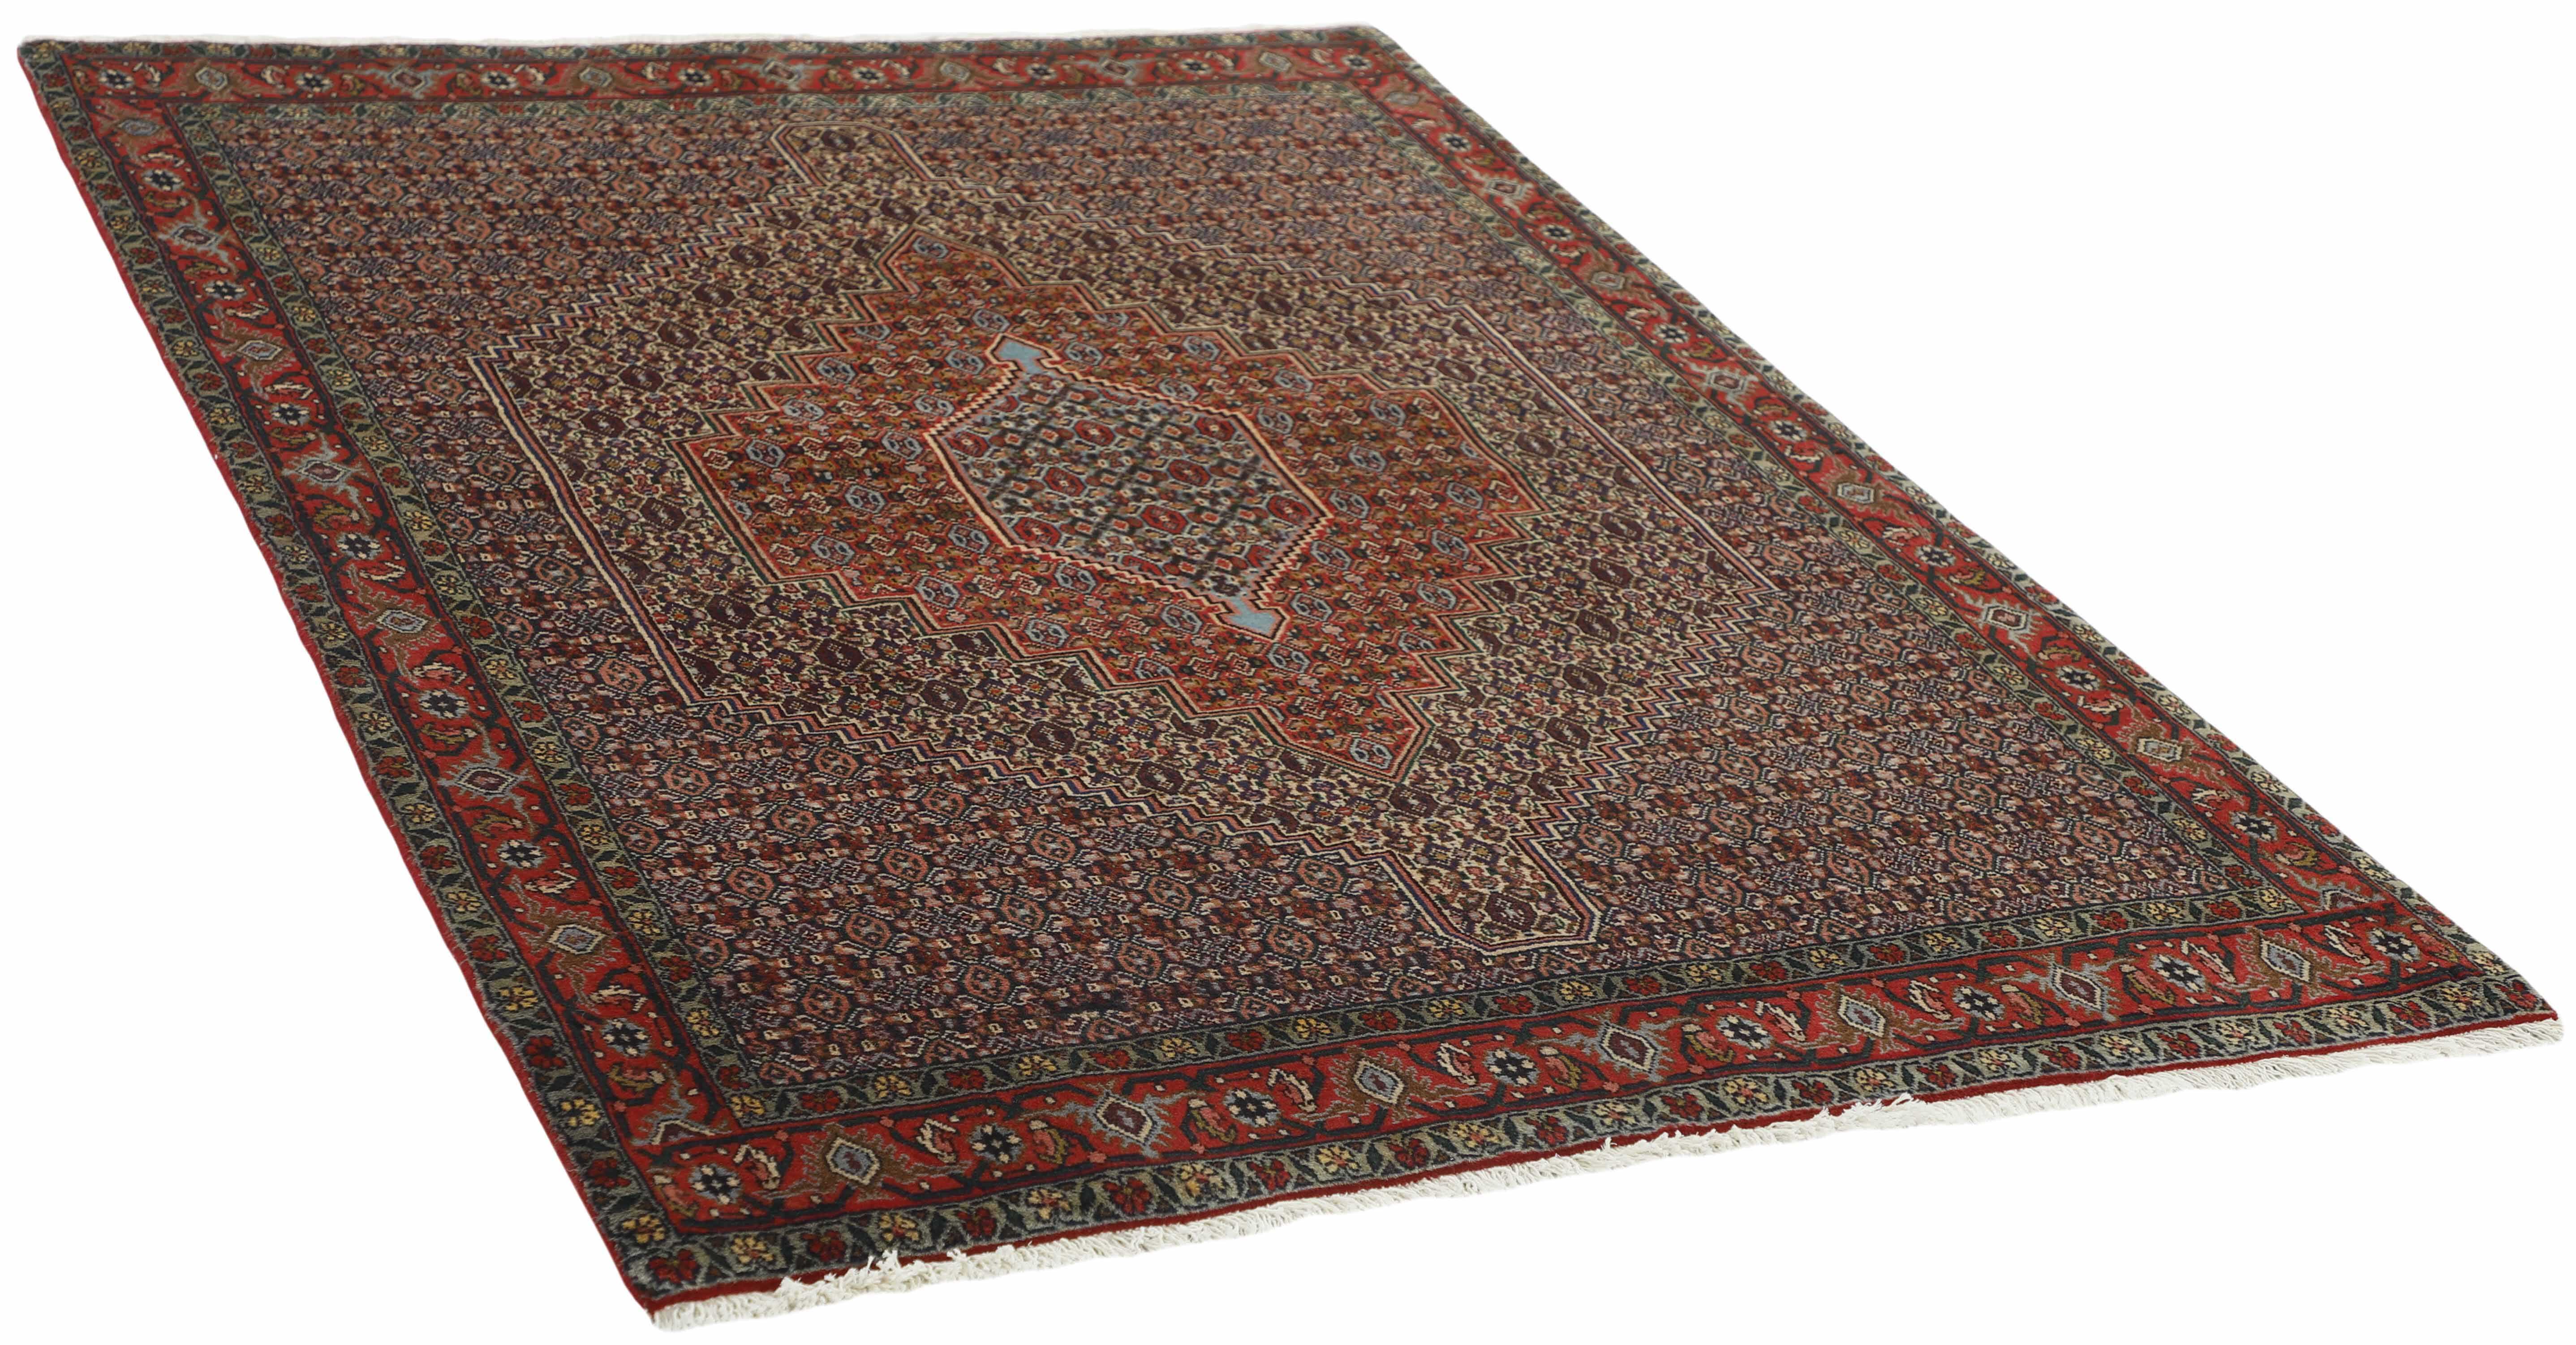 authentic persian rug with a traditional geometric design in red